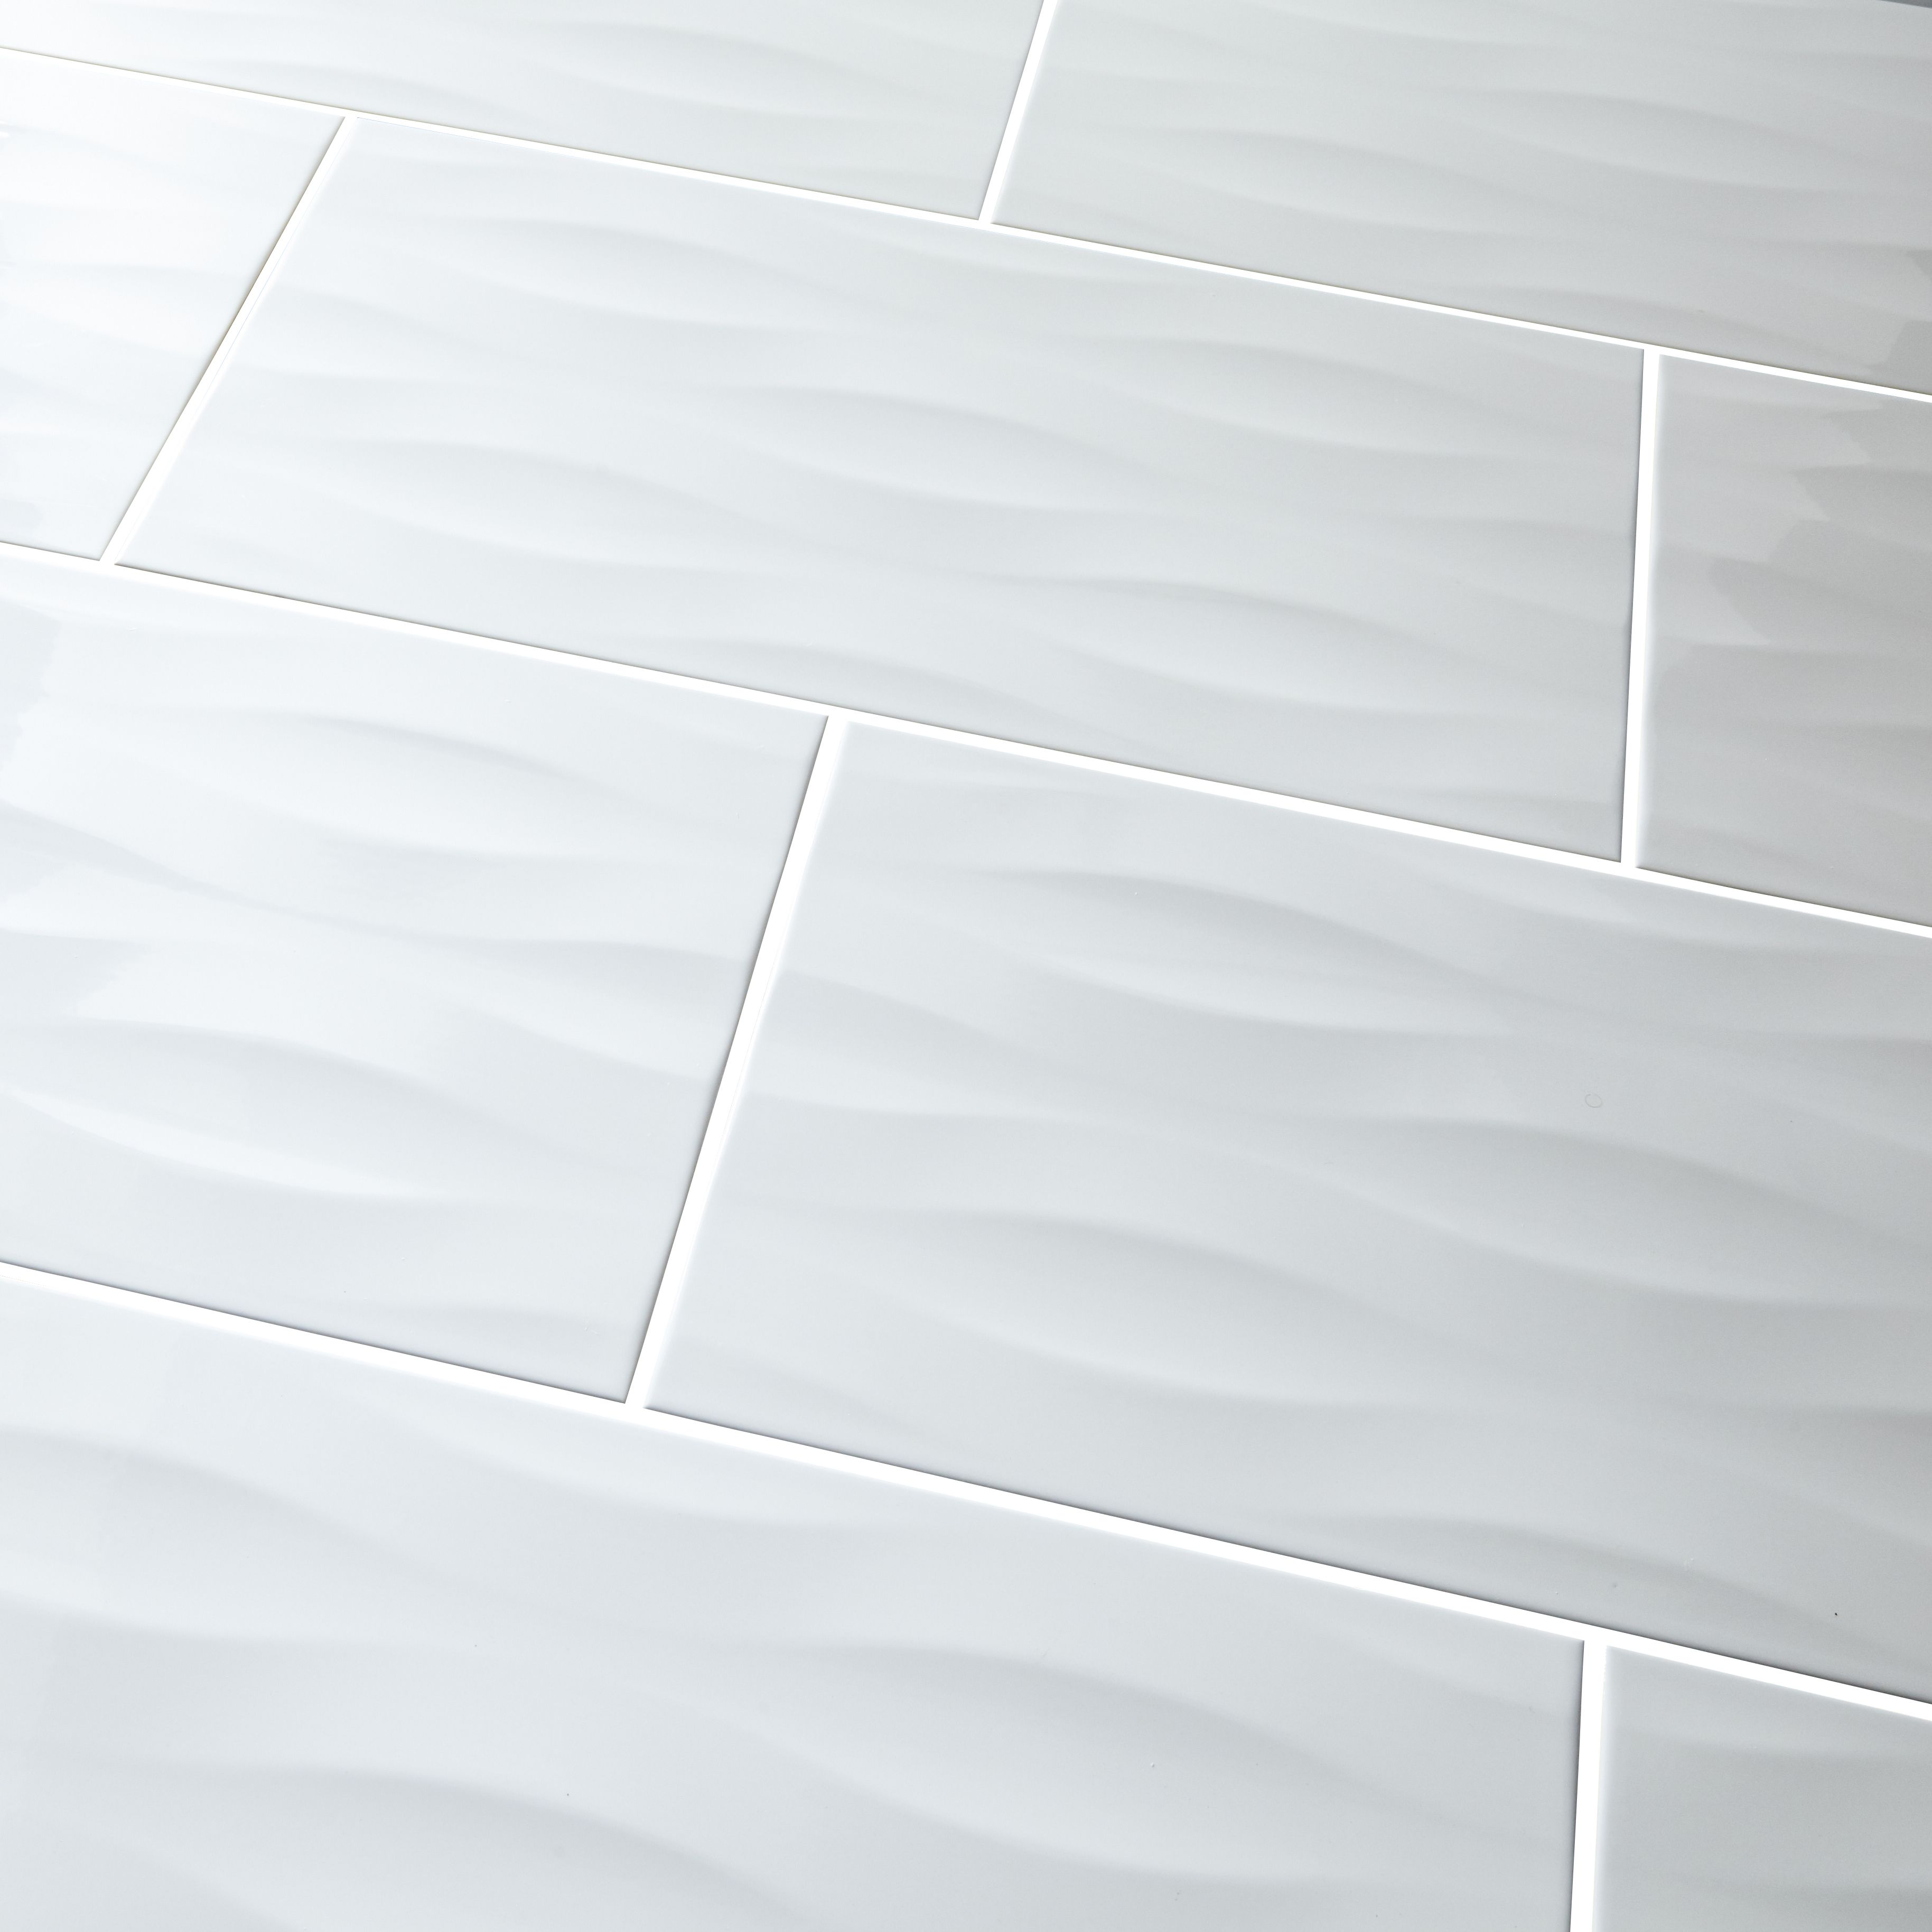 Perouso White Gloss 3D decor Embossed Ceramic Indoor Wall Tile, Pack of 6, (L)600mm (W)300mm